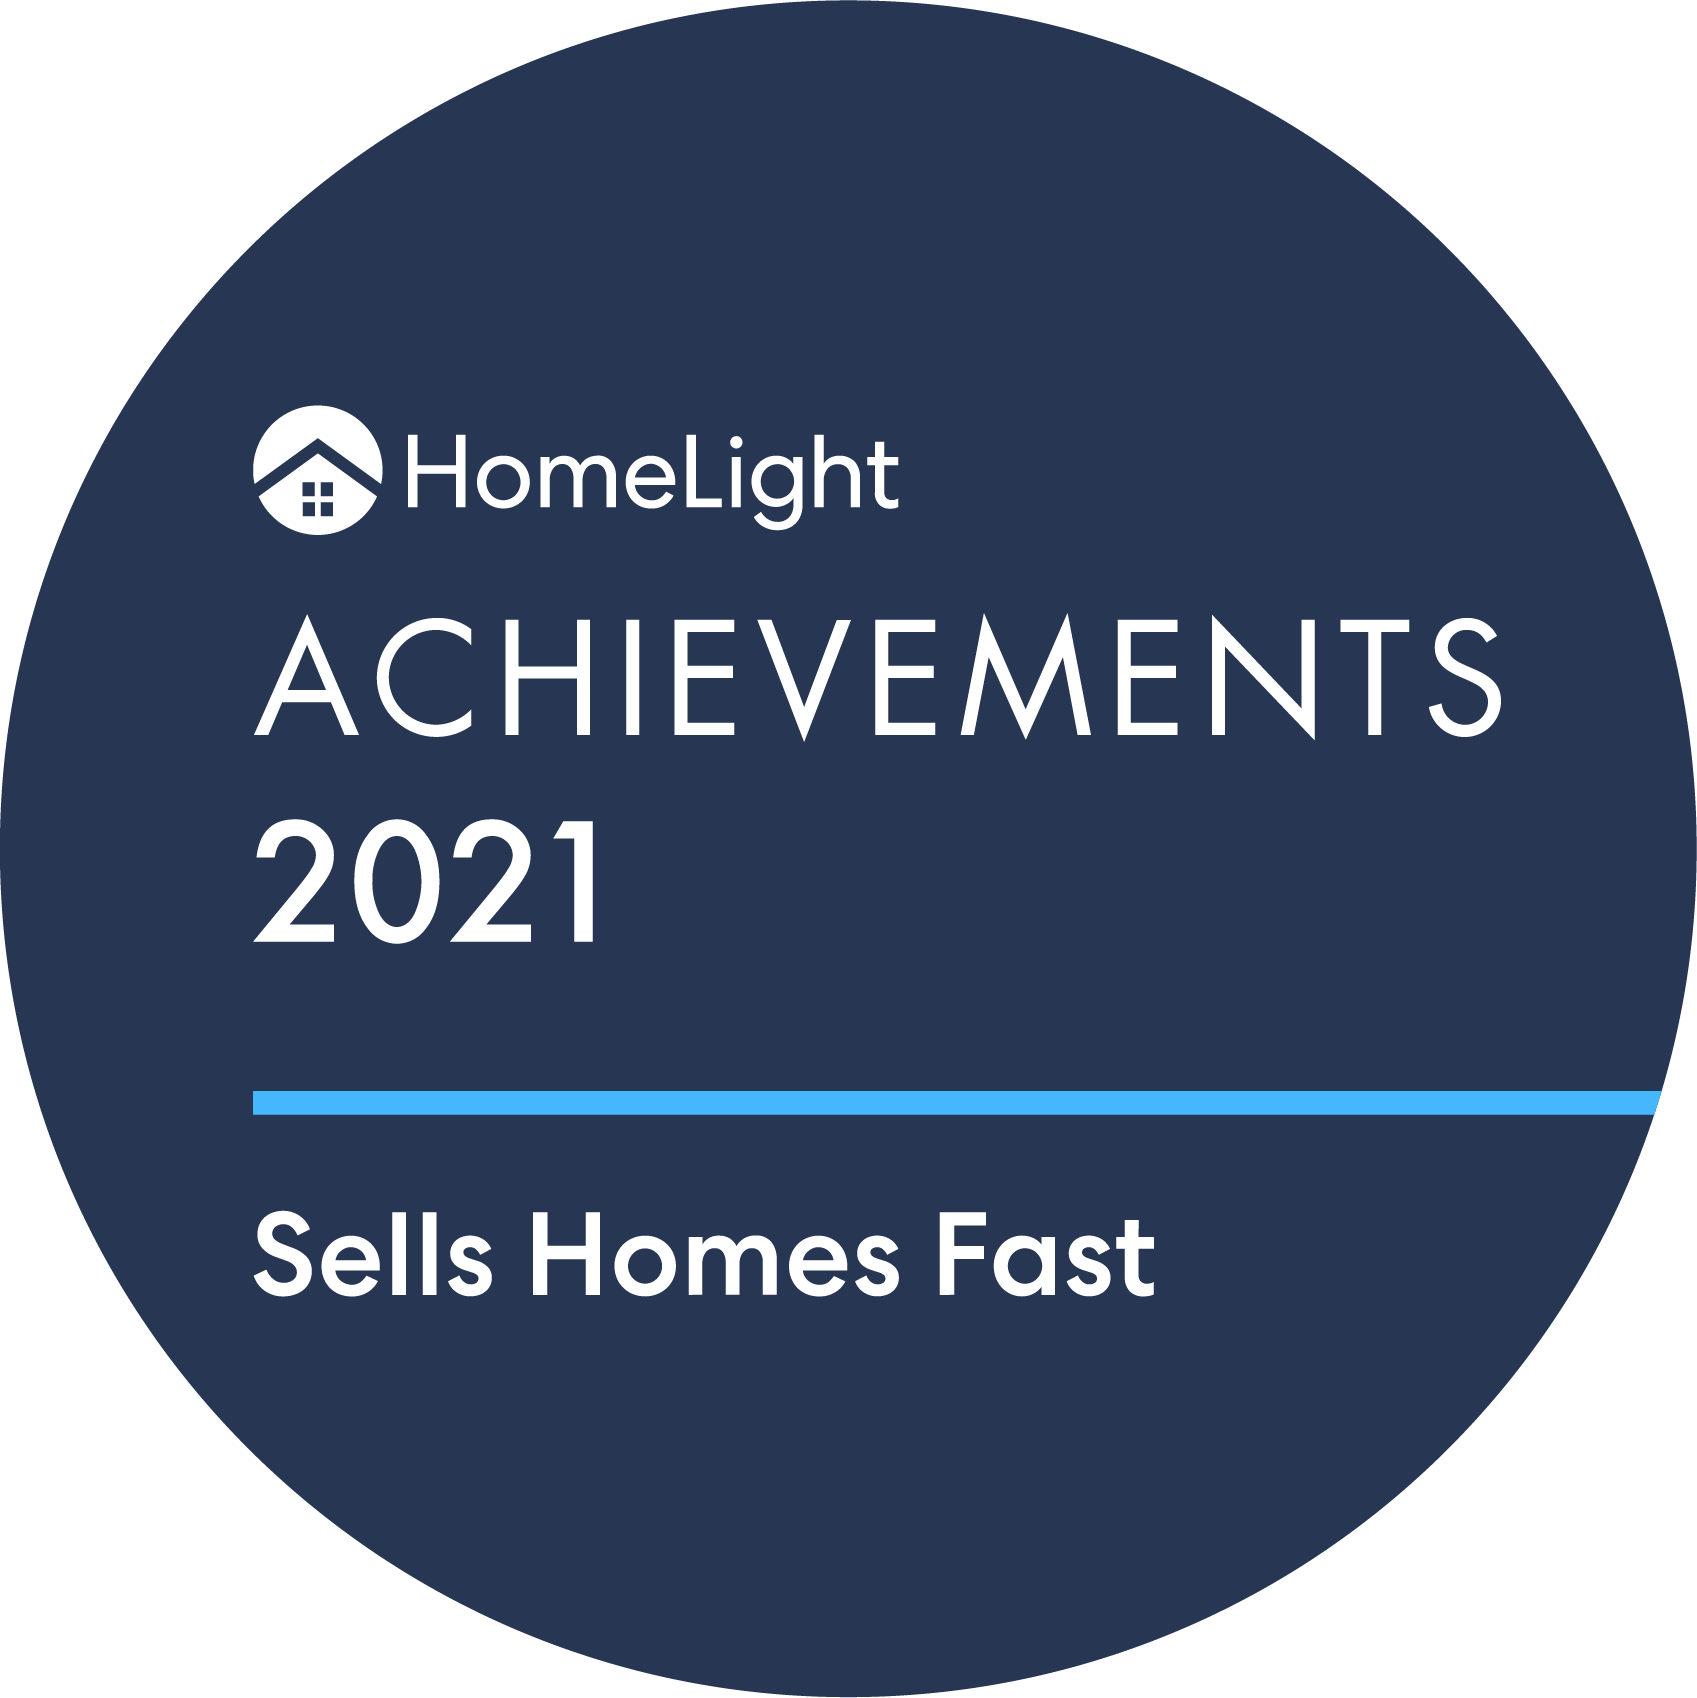 Home Light Achievements 2021 - Sells Homes Fast